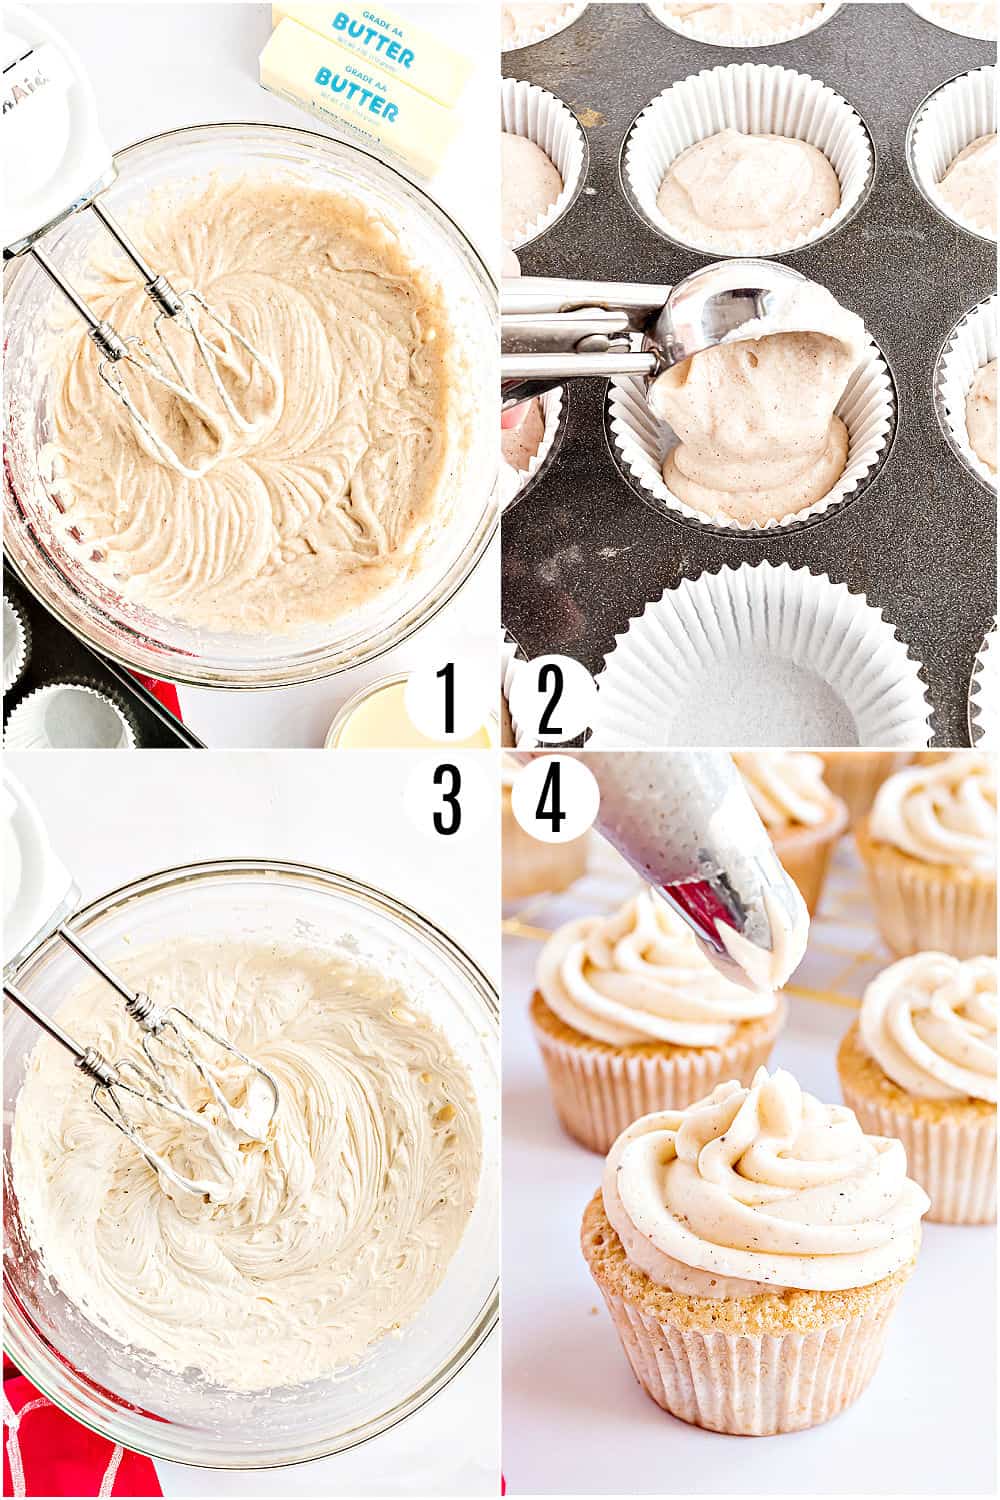 Step by step photos showing how to make eggnog cupcakes.